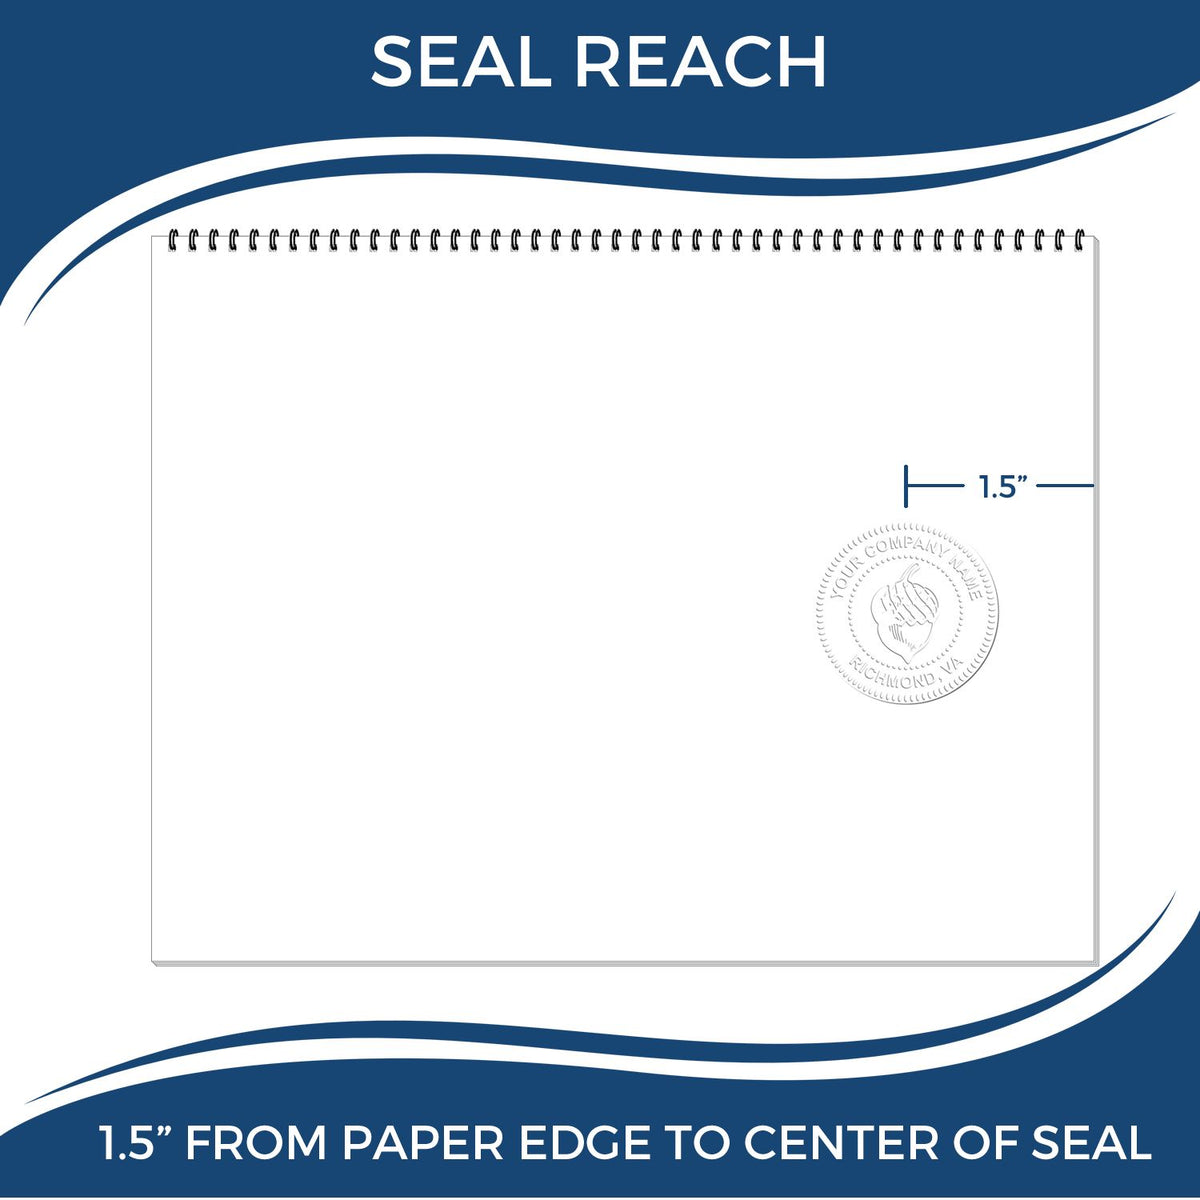 An infographic showing the seal reach which is represented by a ruler and a miniature seal image of the Hybrid Vermont Landscape Architect Seal